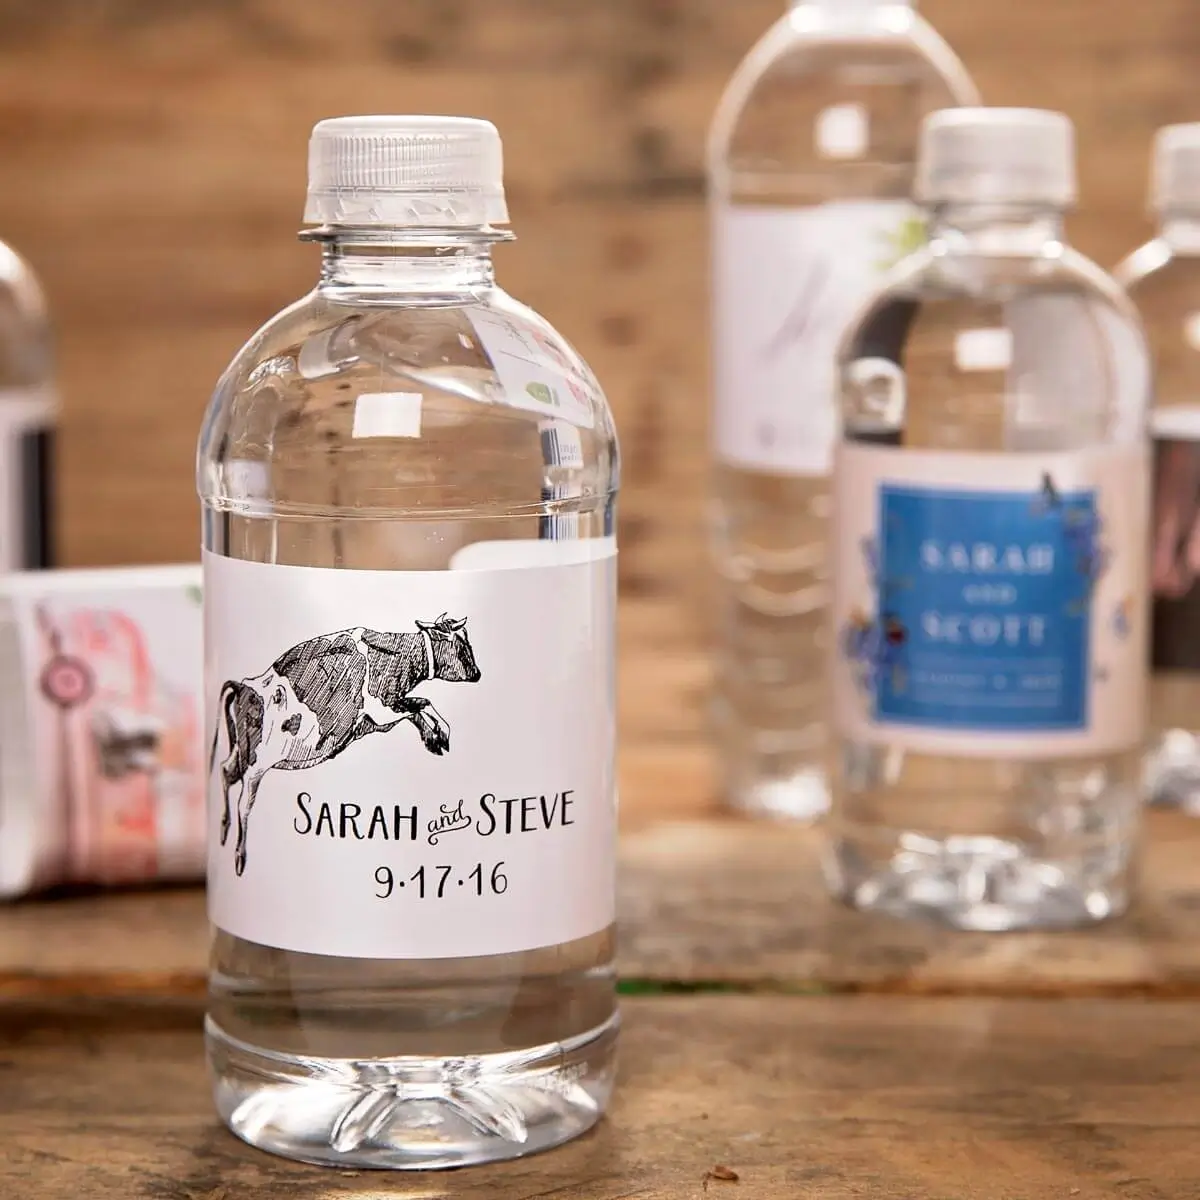 Personalized Recycled Water Bottle- great Wedding gift